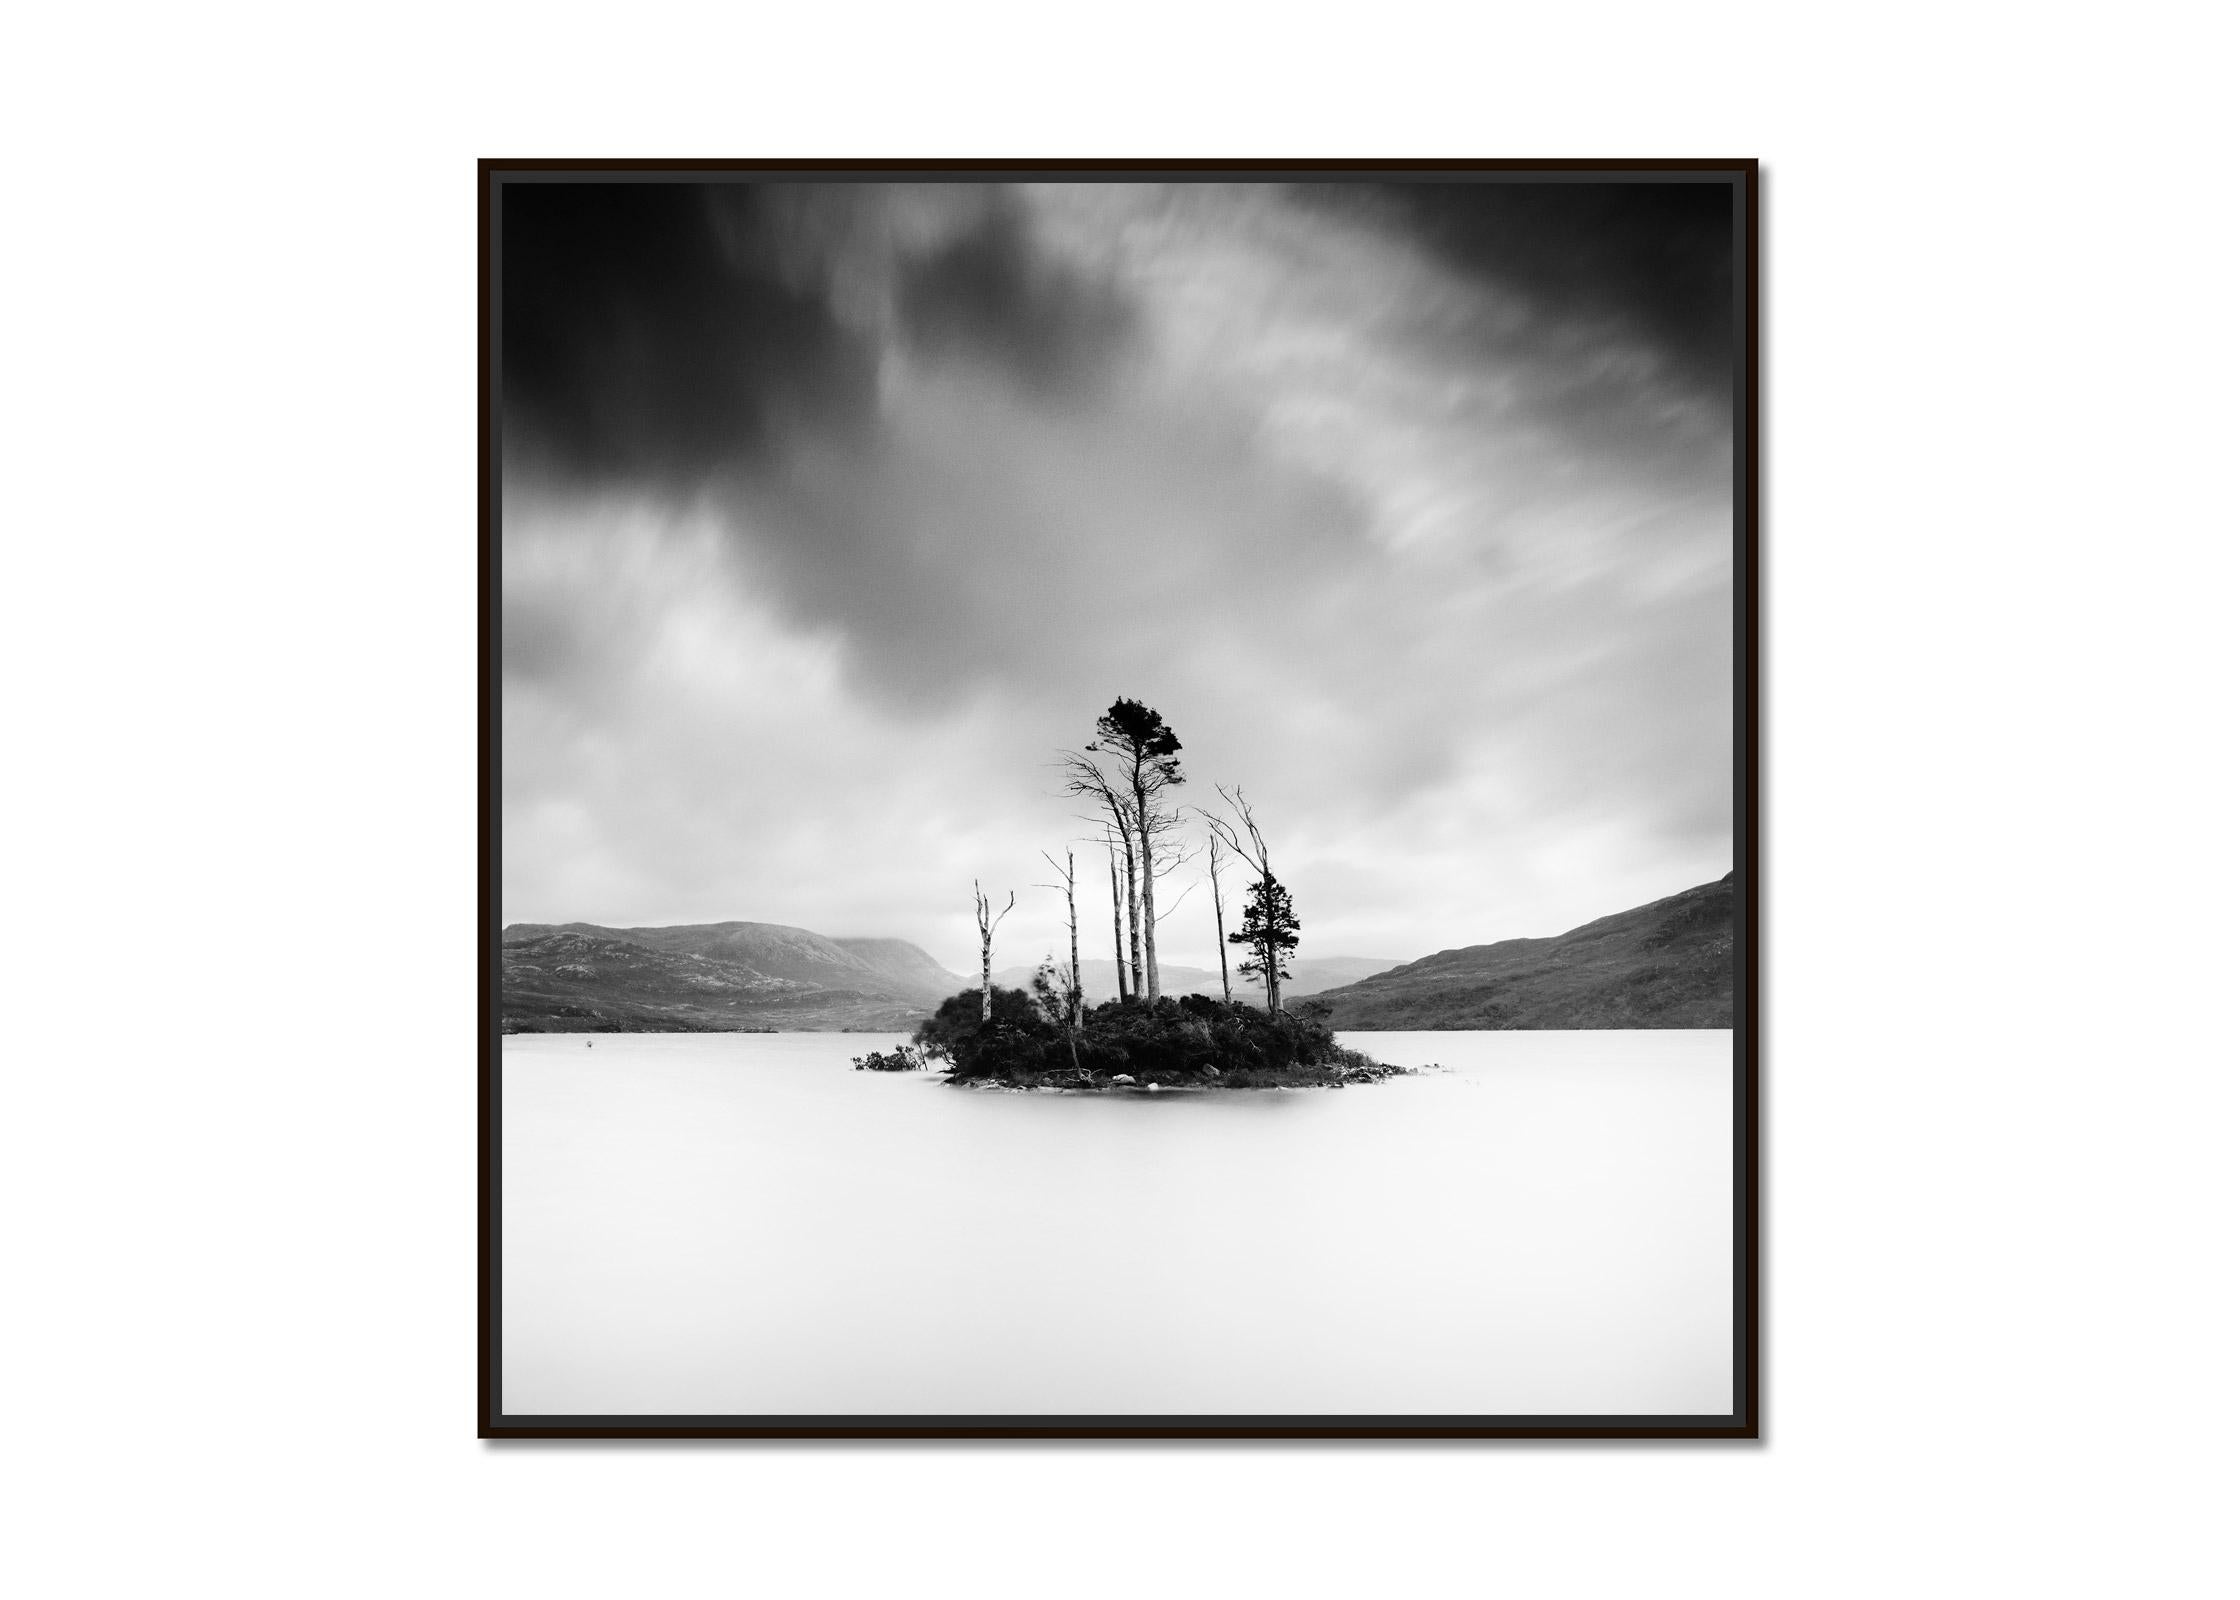 Drowned Island, Trees, Hills, Island, Scotland, black and white, landscape photo - Photograph by Gerald Berghammer